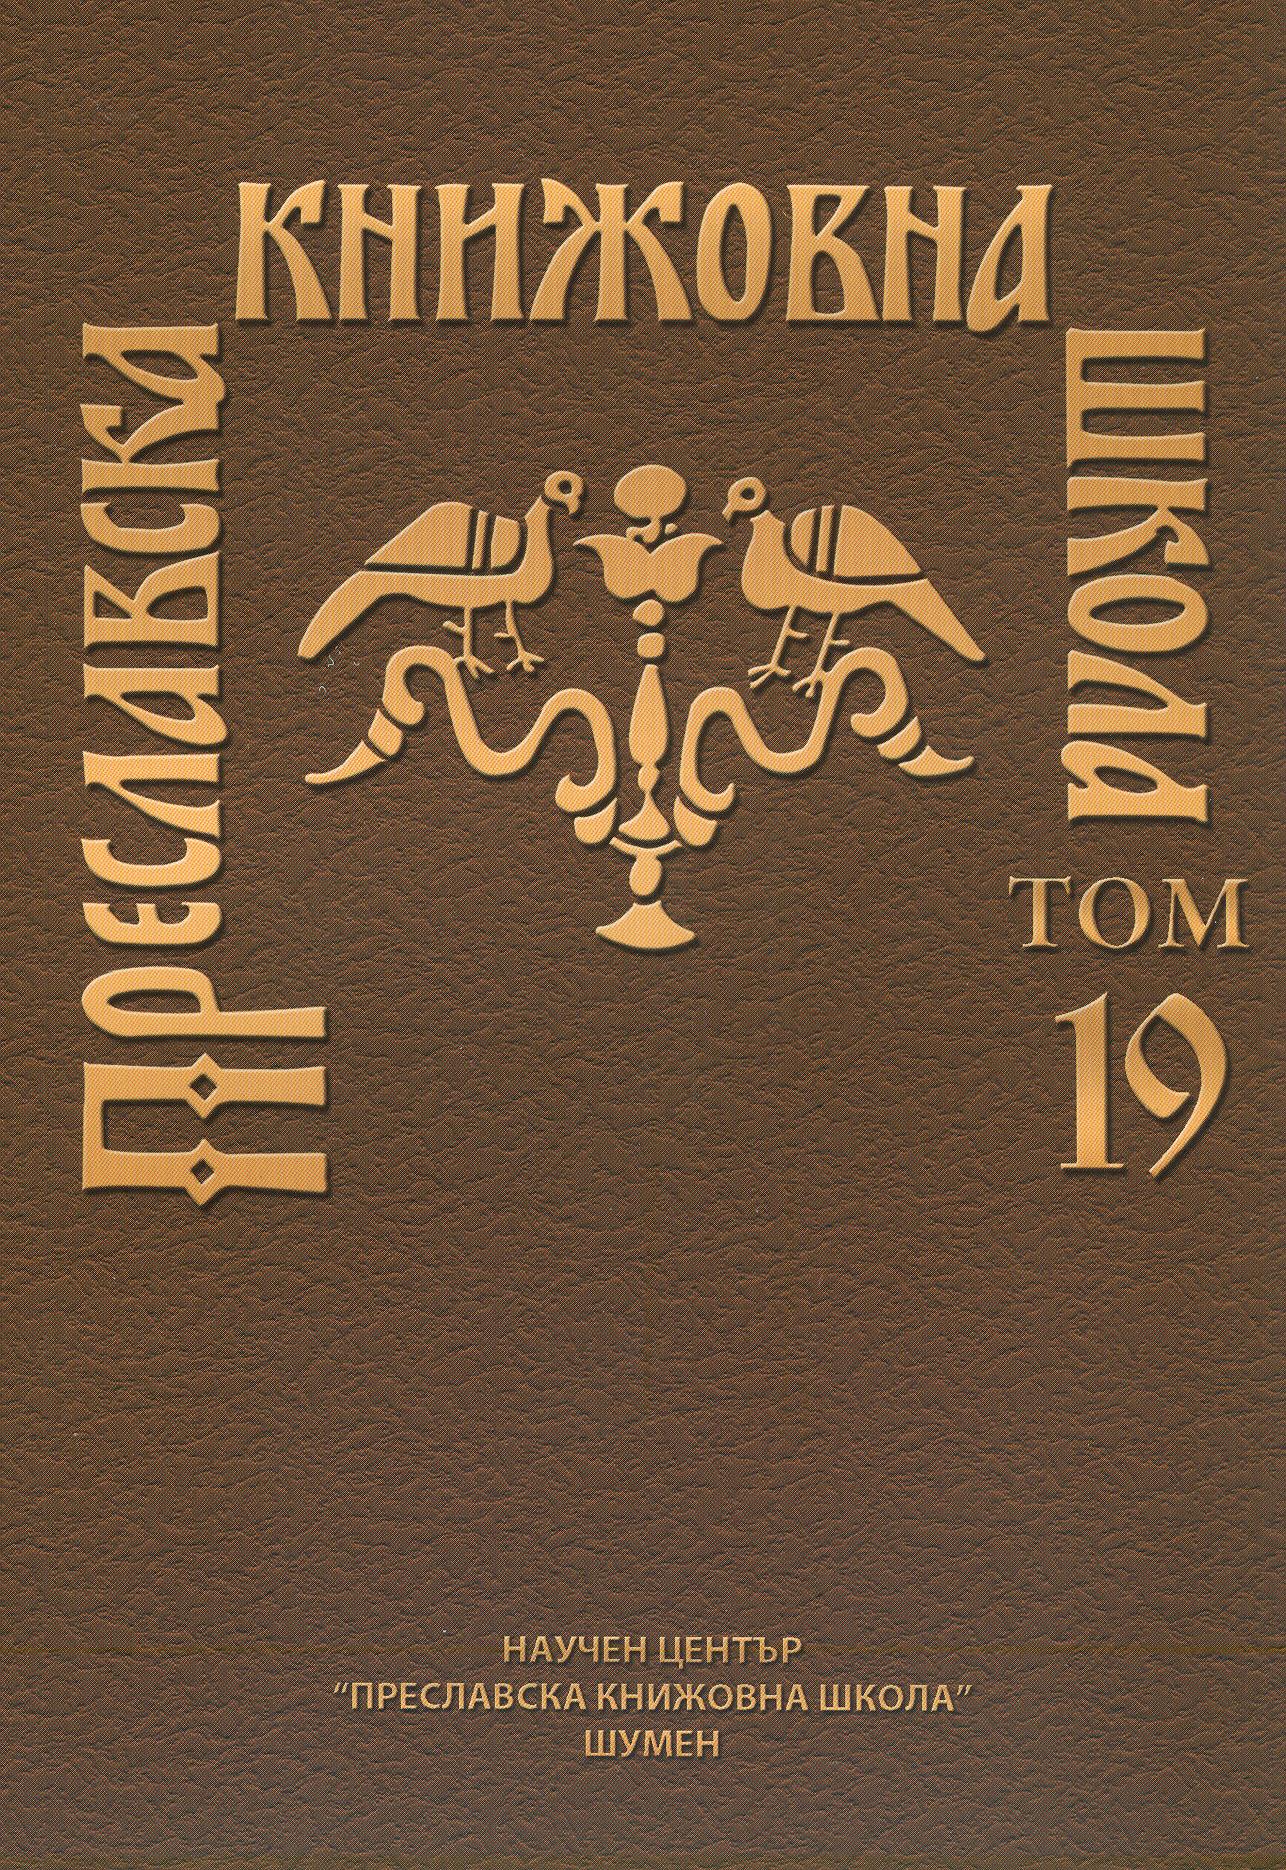 ATHANASIUS’ ORATIONS AGAINST THE ARIANS: THEOLOGICAL GLOSSES IN TWO SLAVONIC MANUSCRIPTS Cover Image